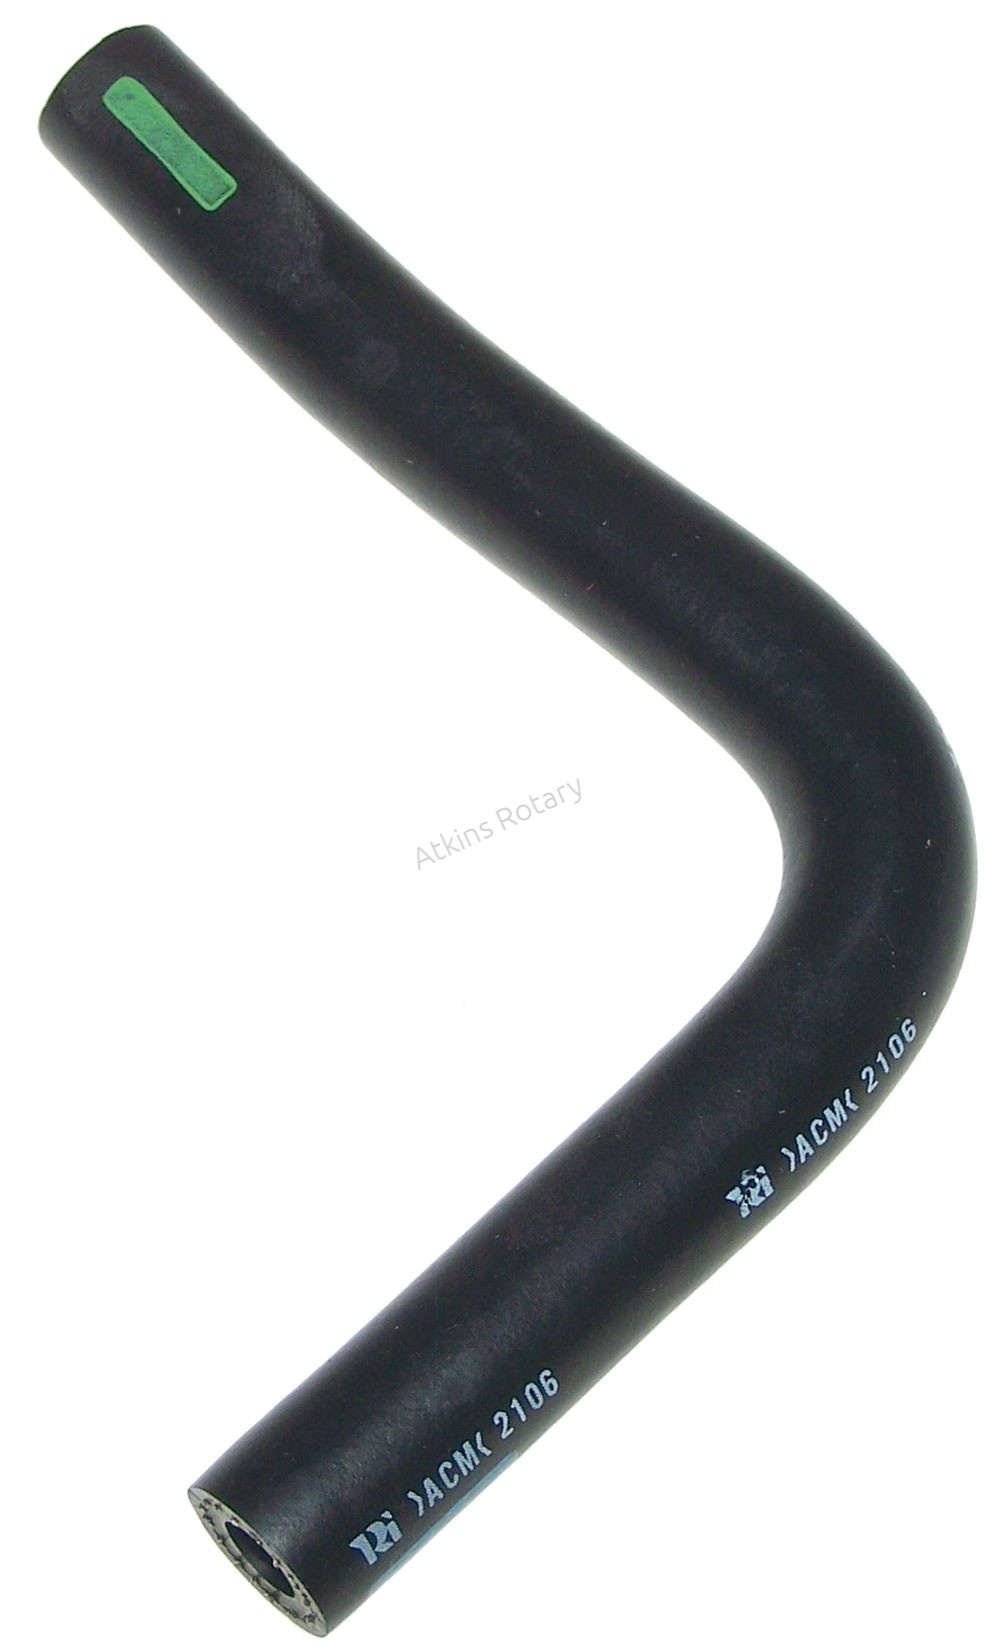 04-08 Rx8 Automatic Transmission Oil Cooler Drain Hose (BW60-19-934)